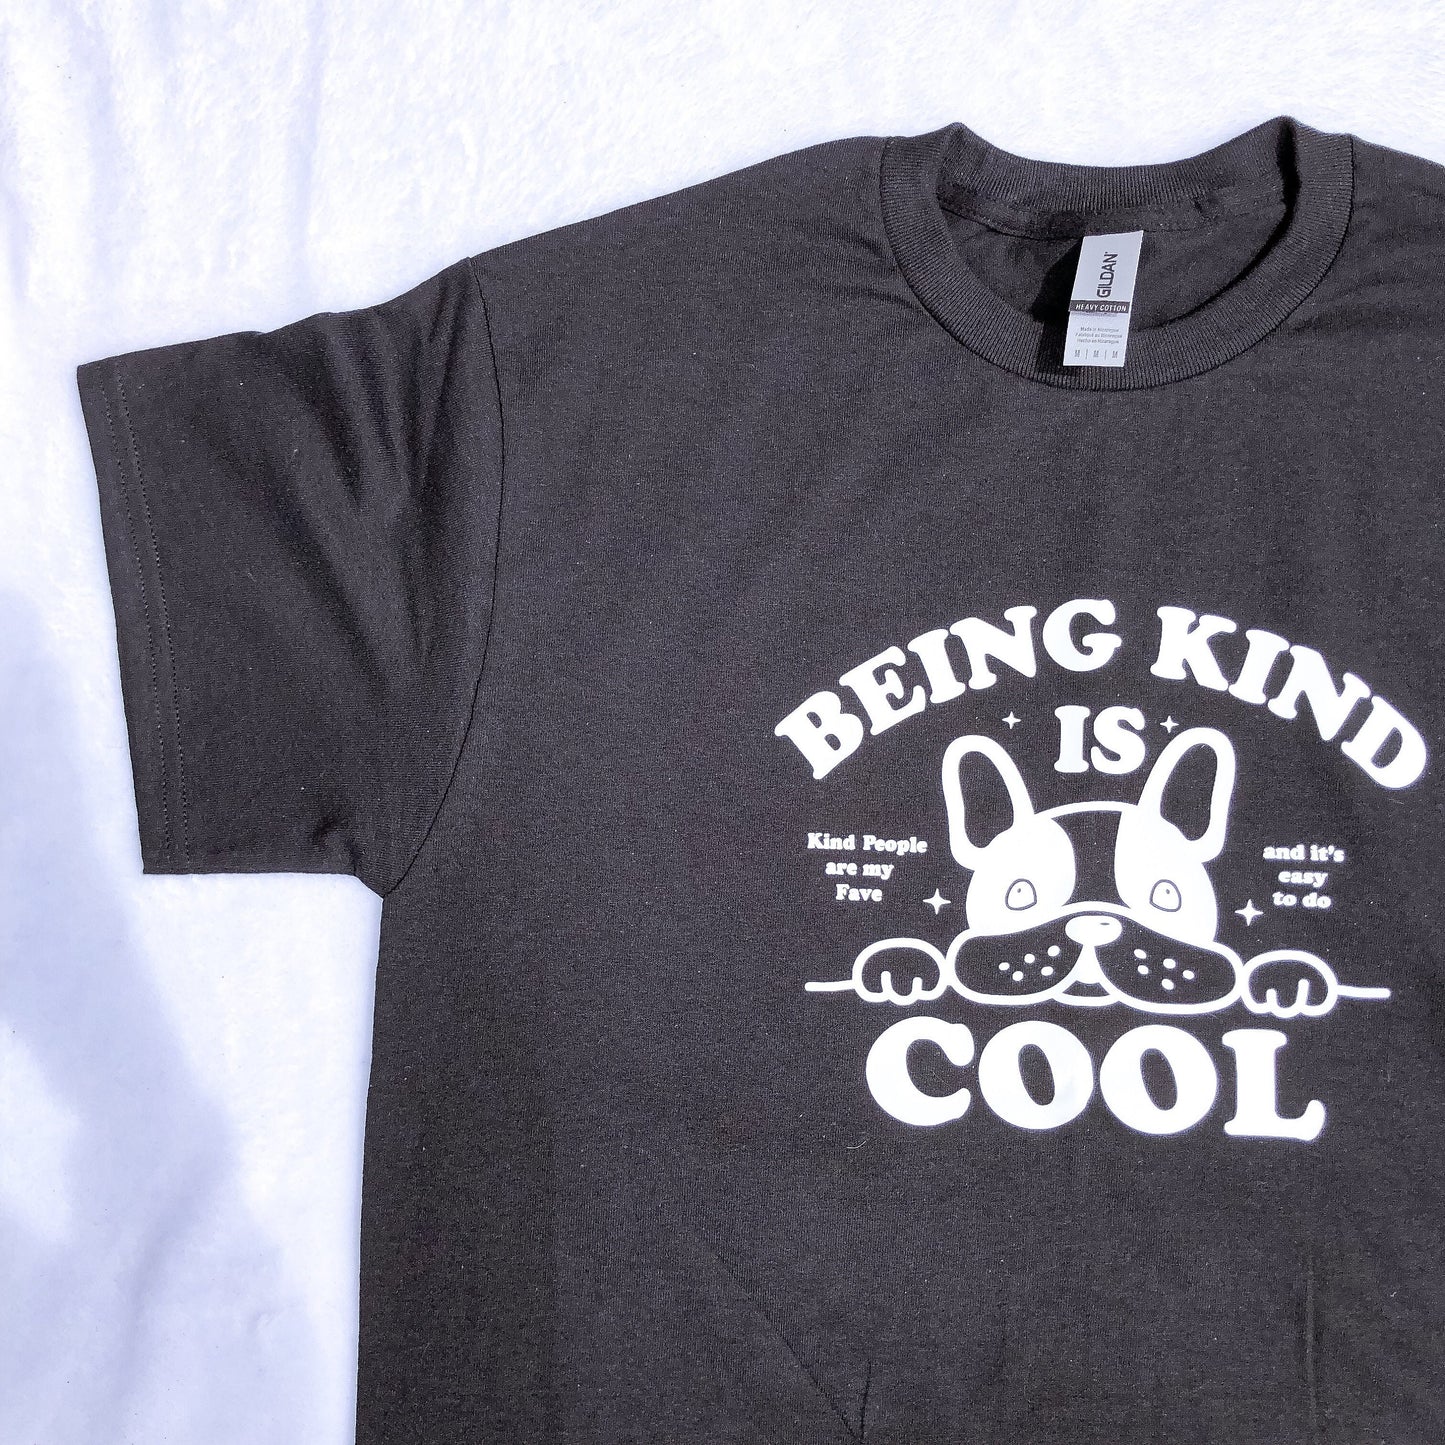 Being Kind is Cool Tshirt | Kind People Are My Fav